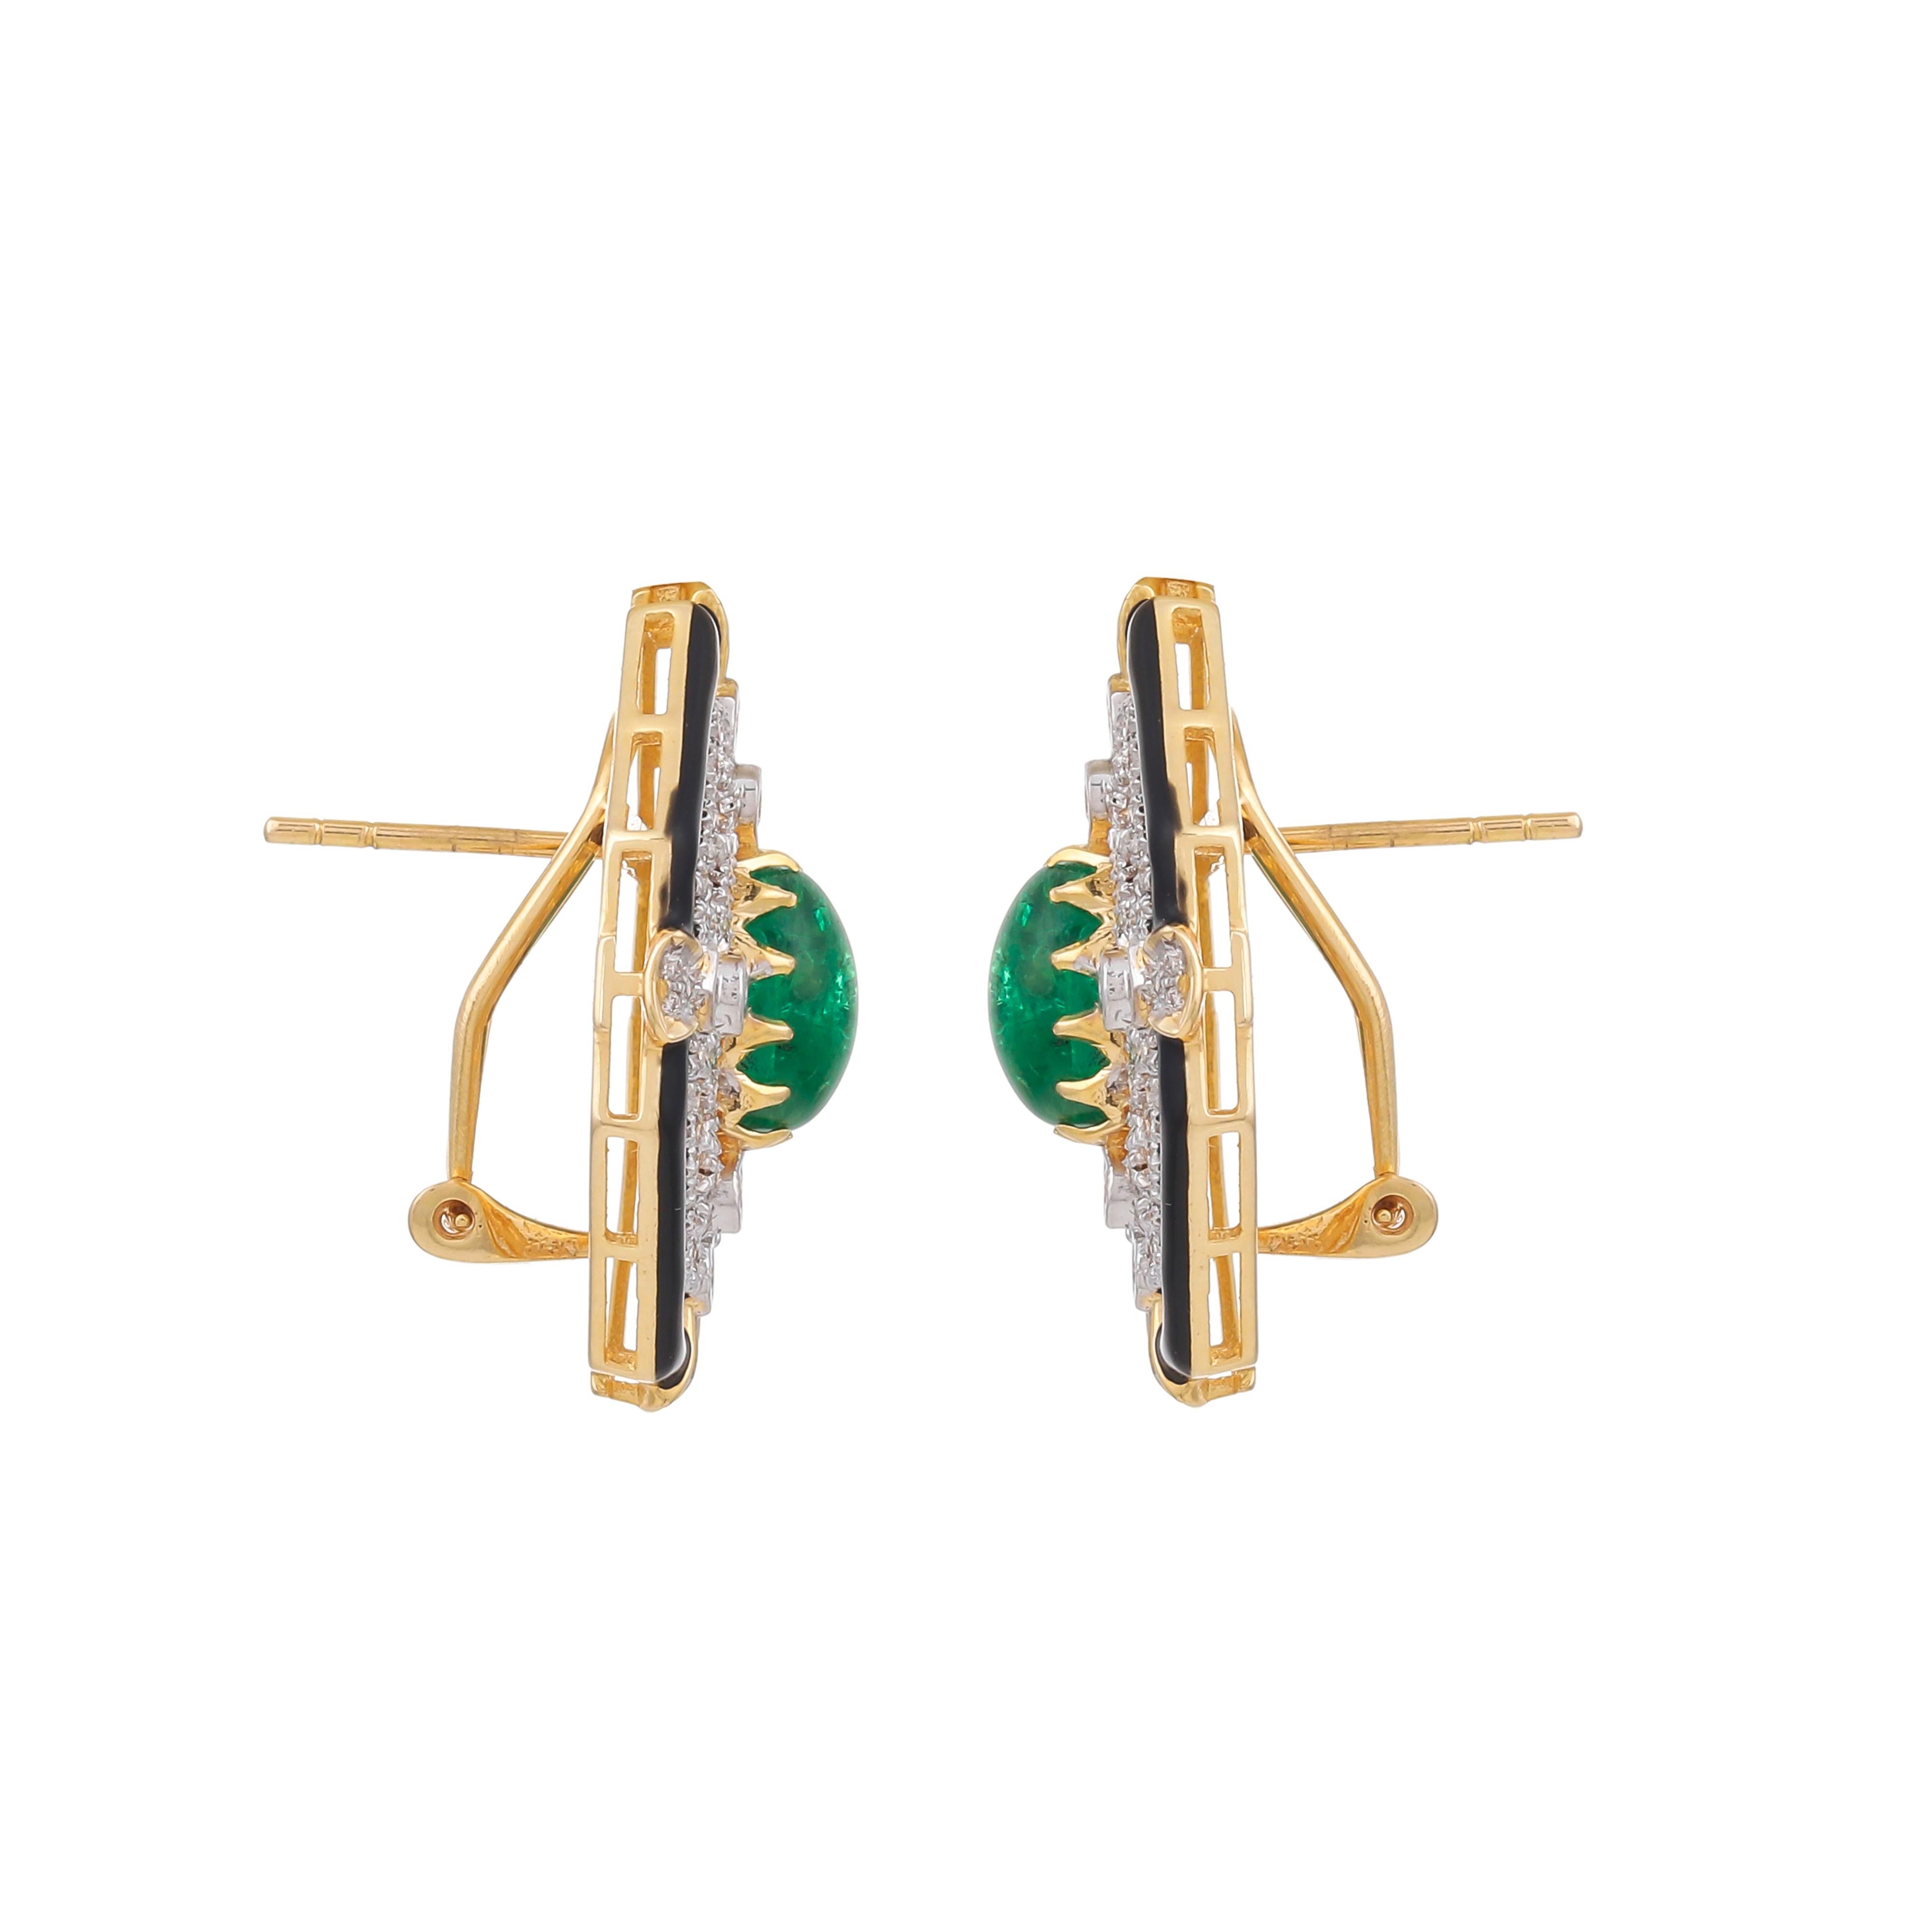 A beguiling beauty to reckon! Featured here is a statement earrings set with oval shaped Zambian emerald cabochon weighing approximately 5.14 carats enhanced with diamonds with a total diamond weight of 0.95 carats in a geometric motif and the black